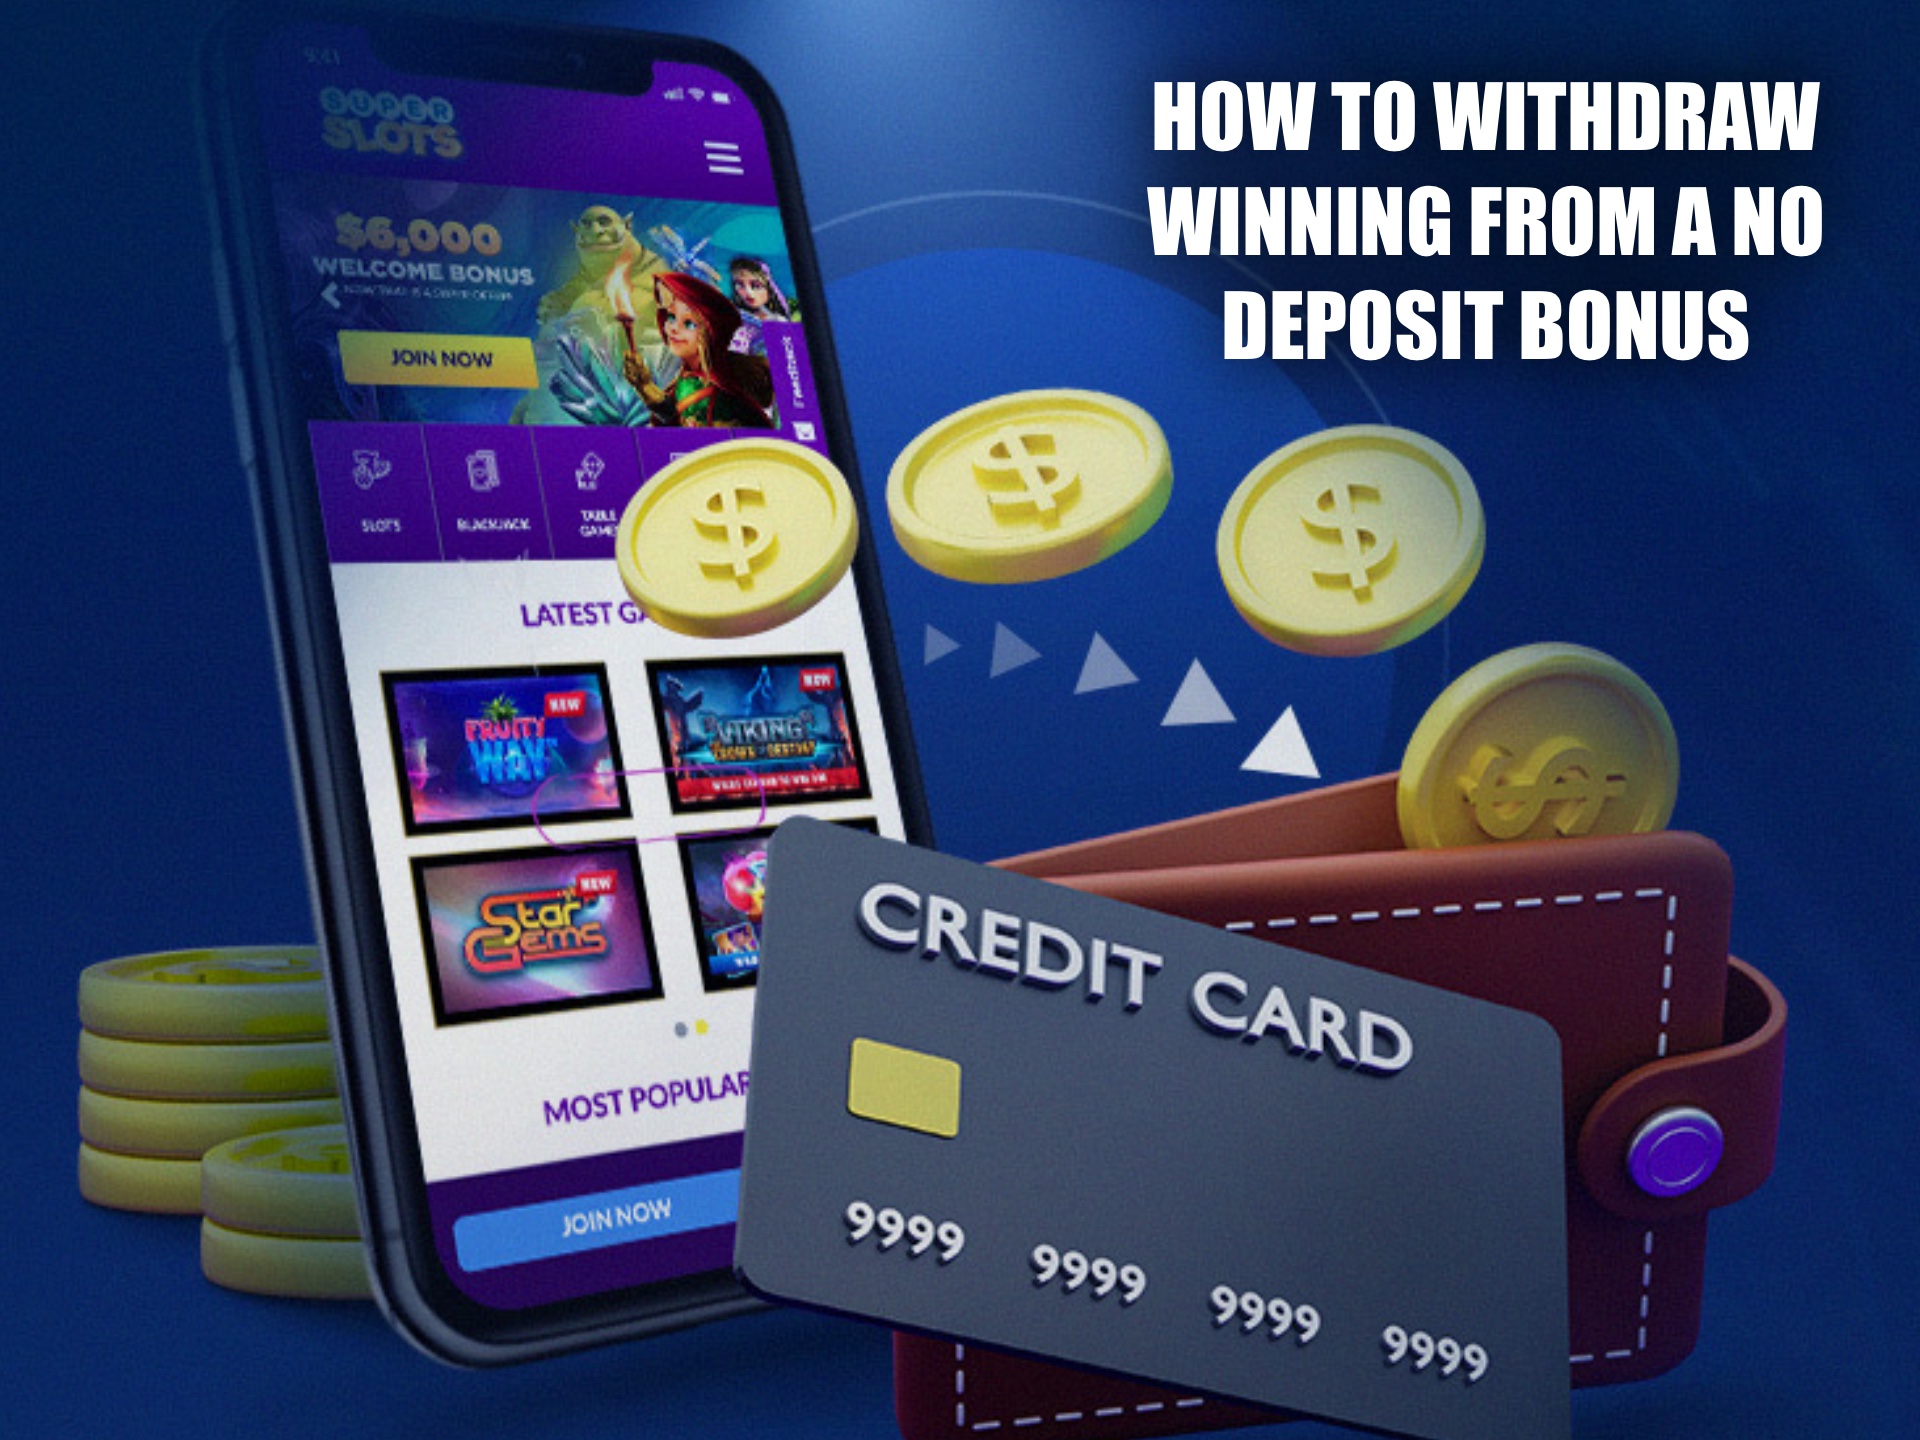 You should meet all the requirements and wagering conditions to withdraw bonus money from an online casino.